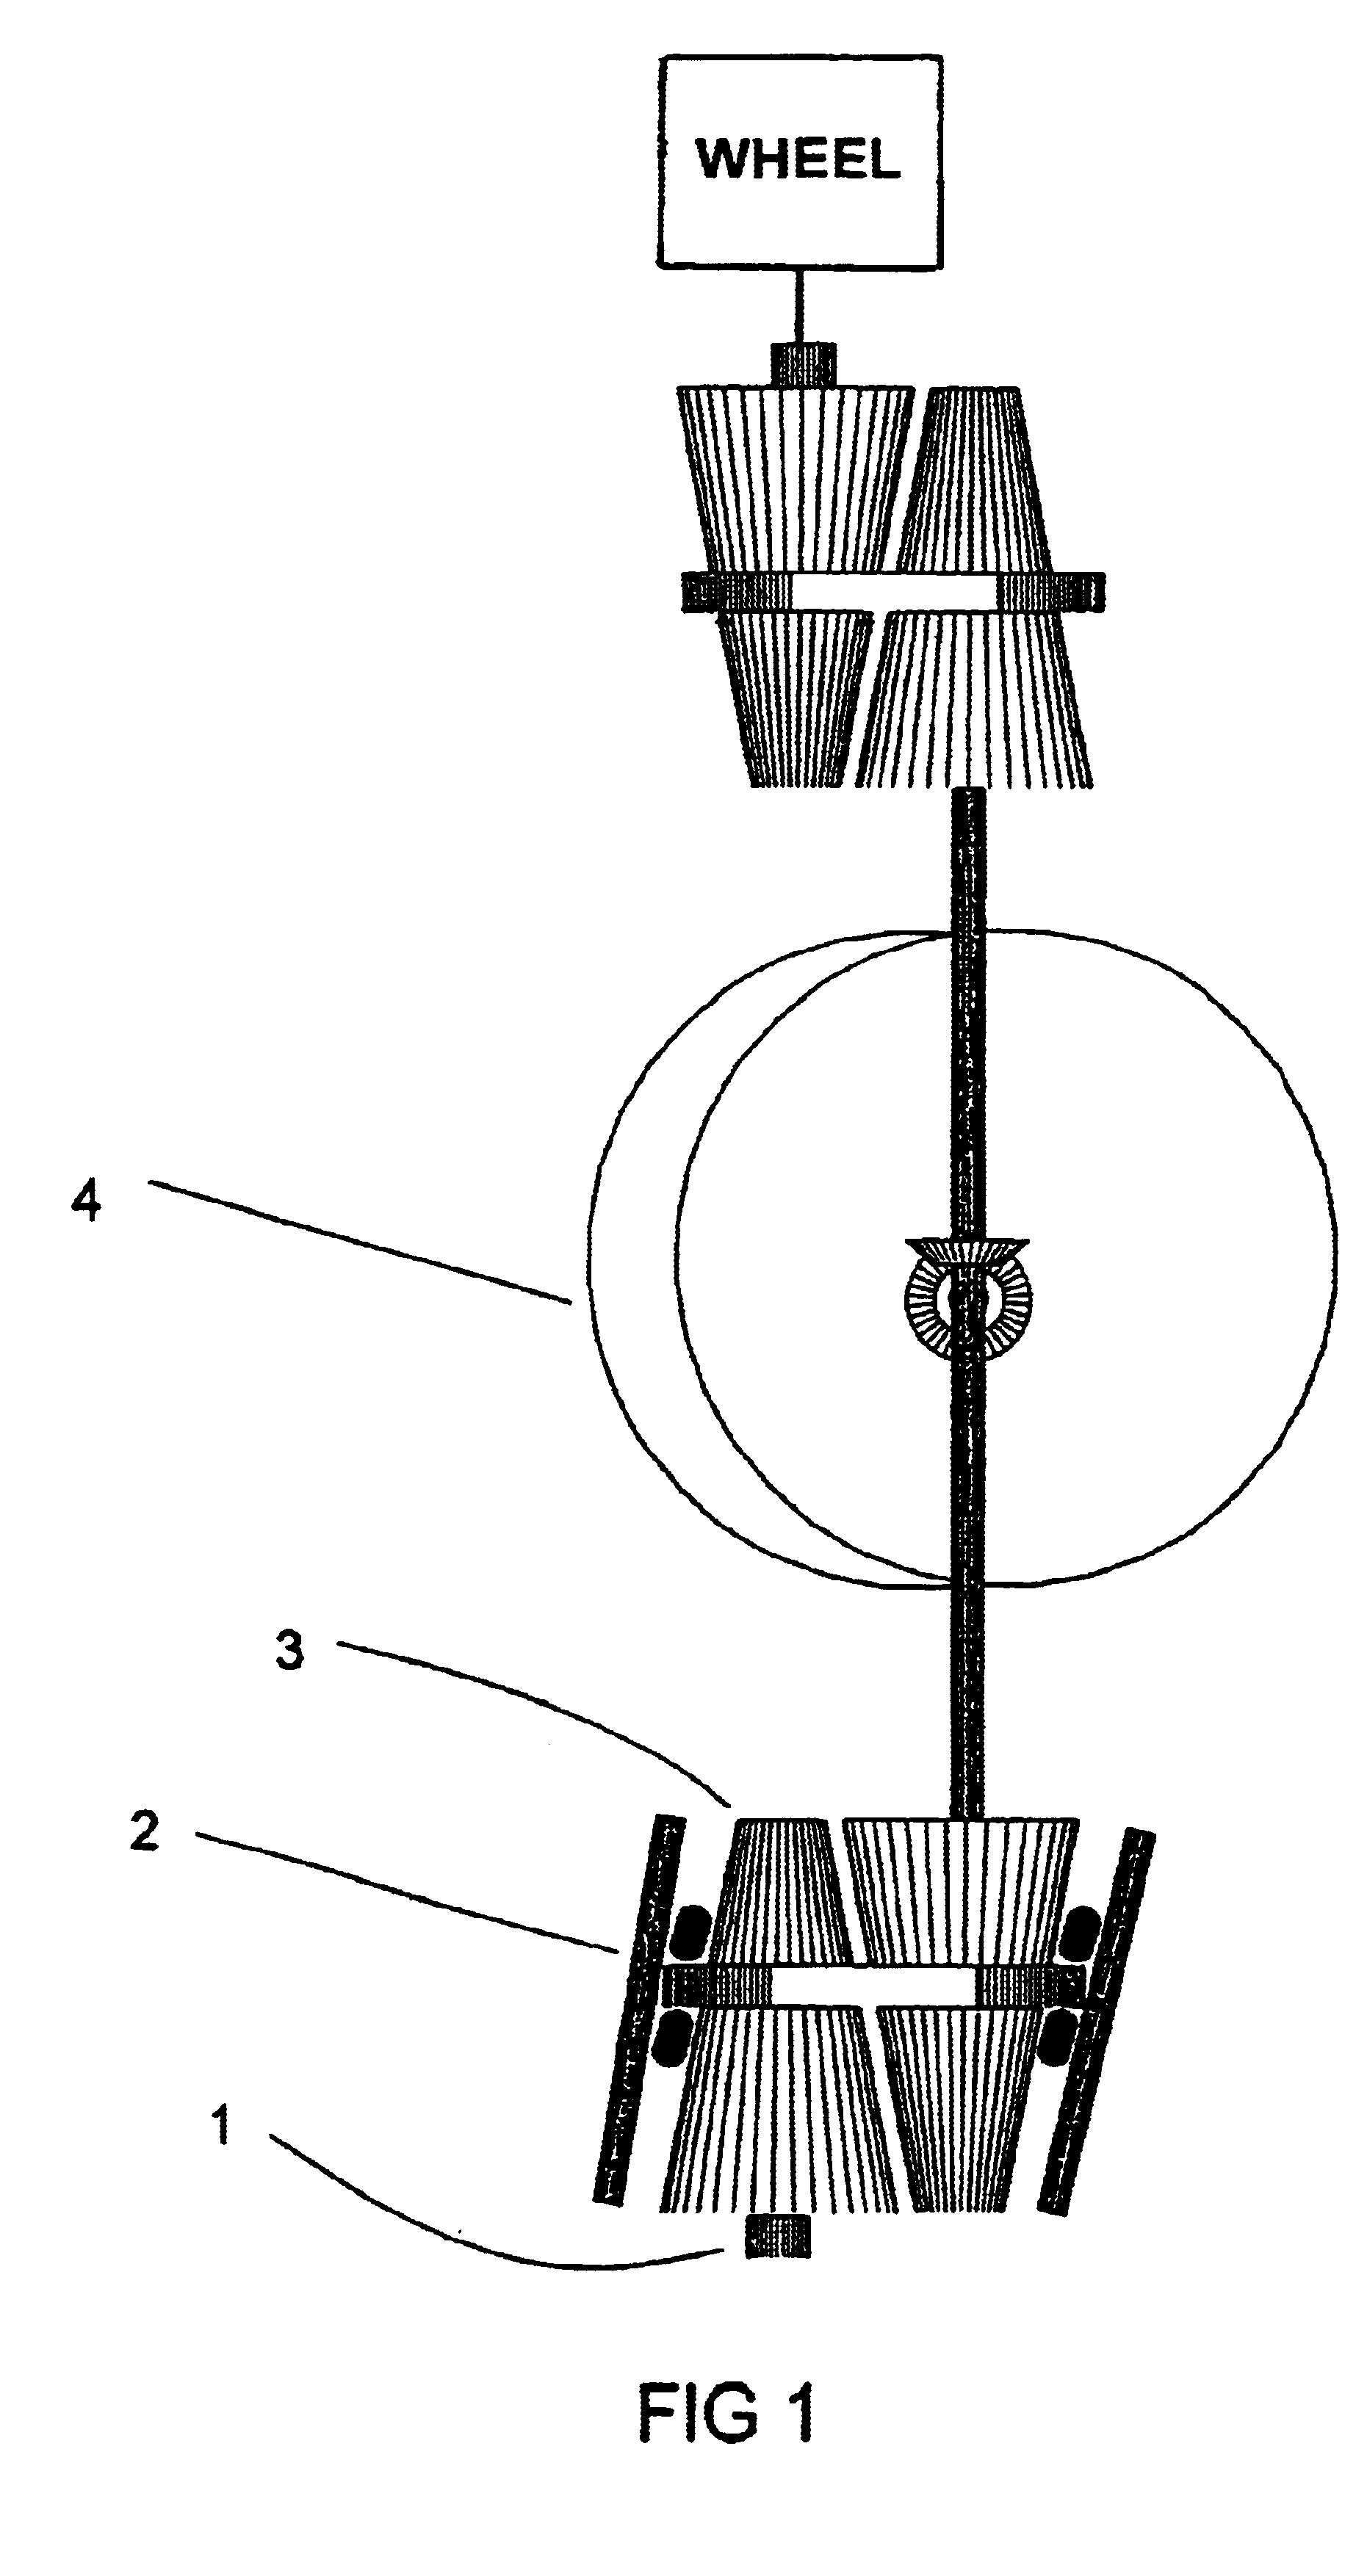 Motor vehicle drivetrain having at least two CNT's and flywheels